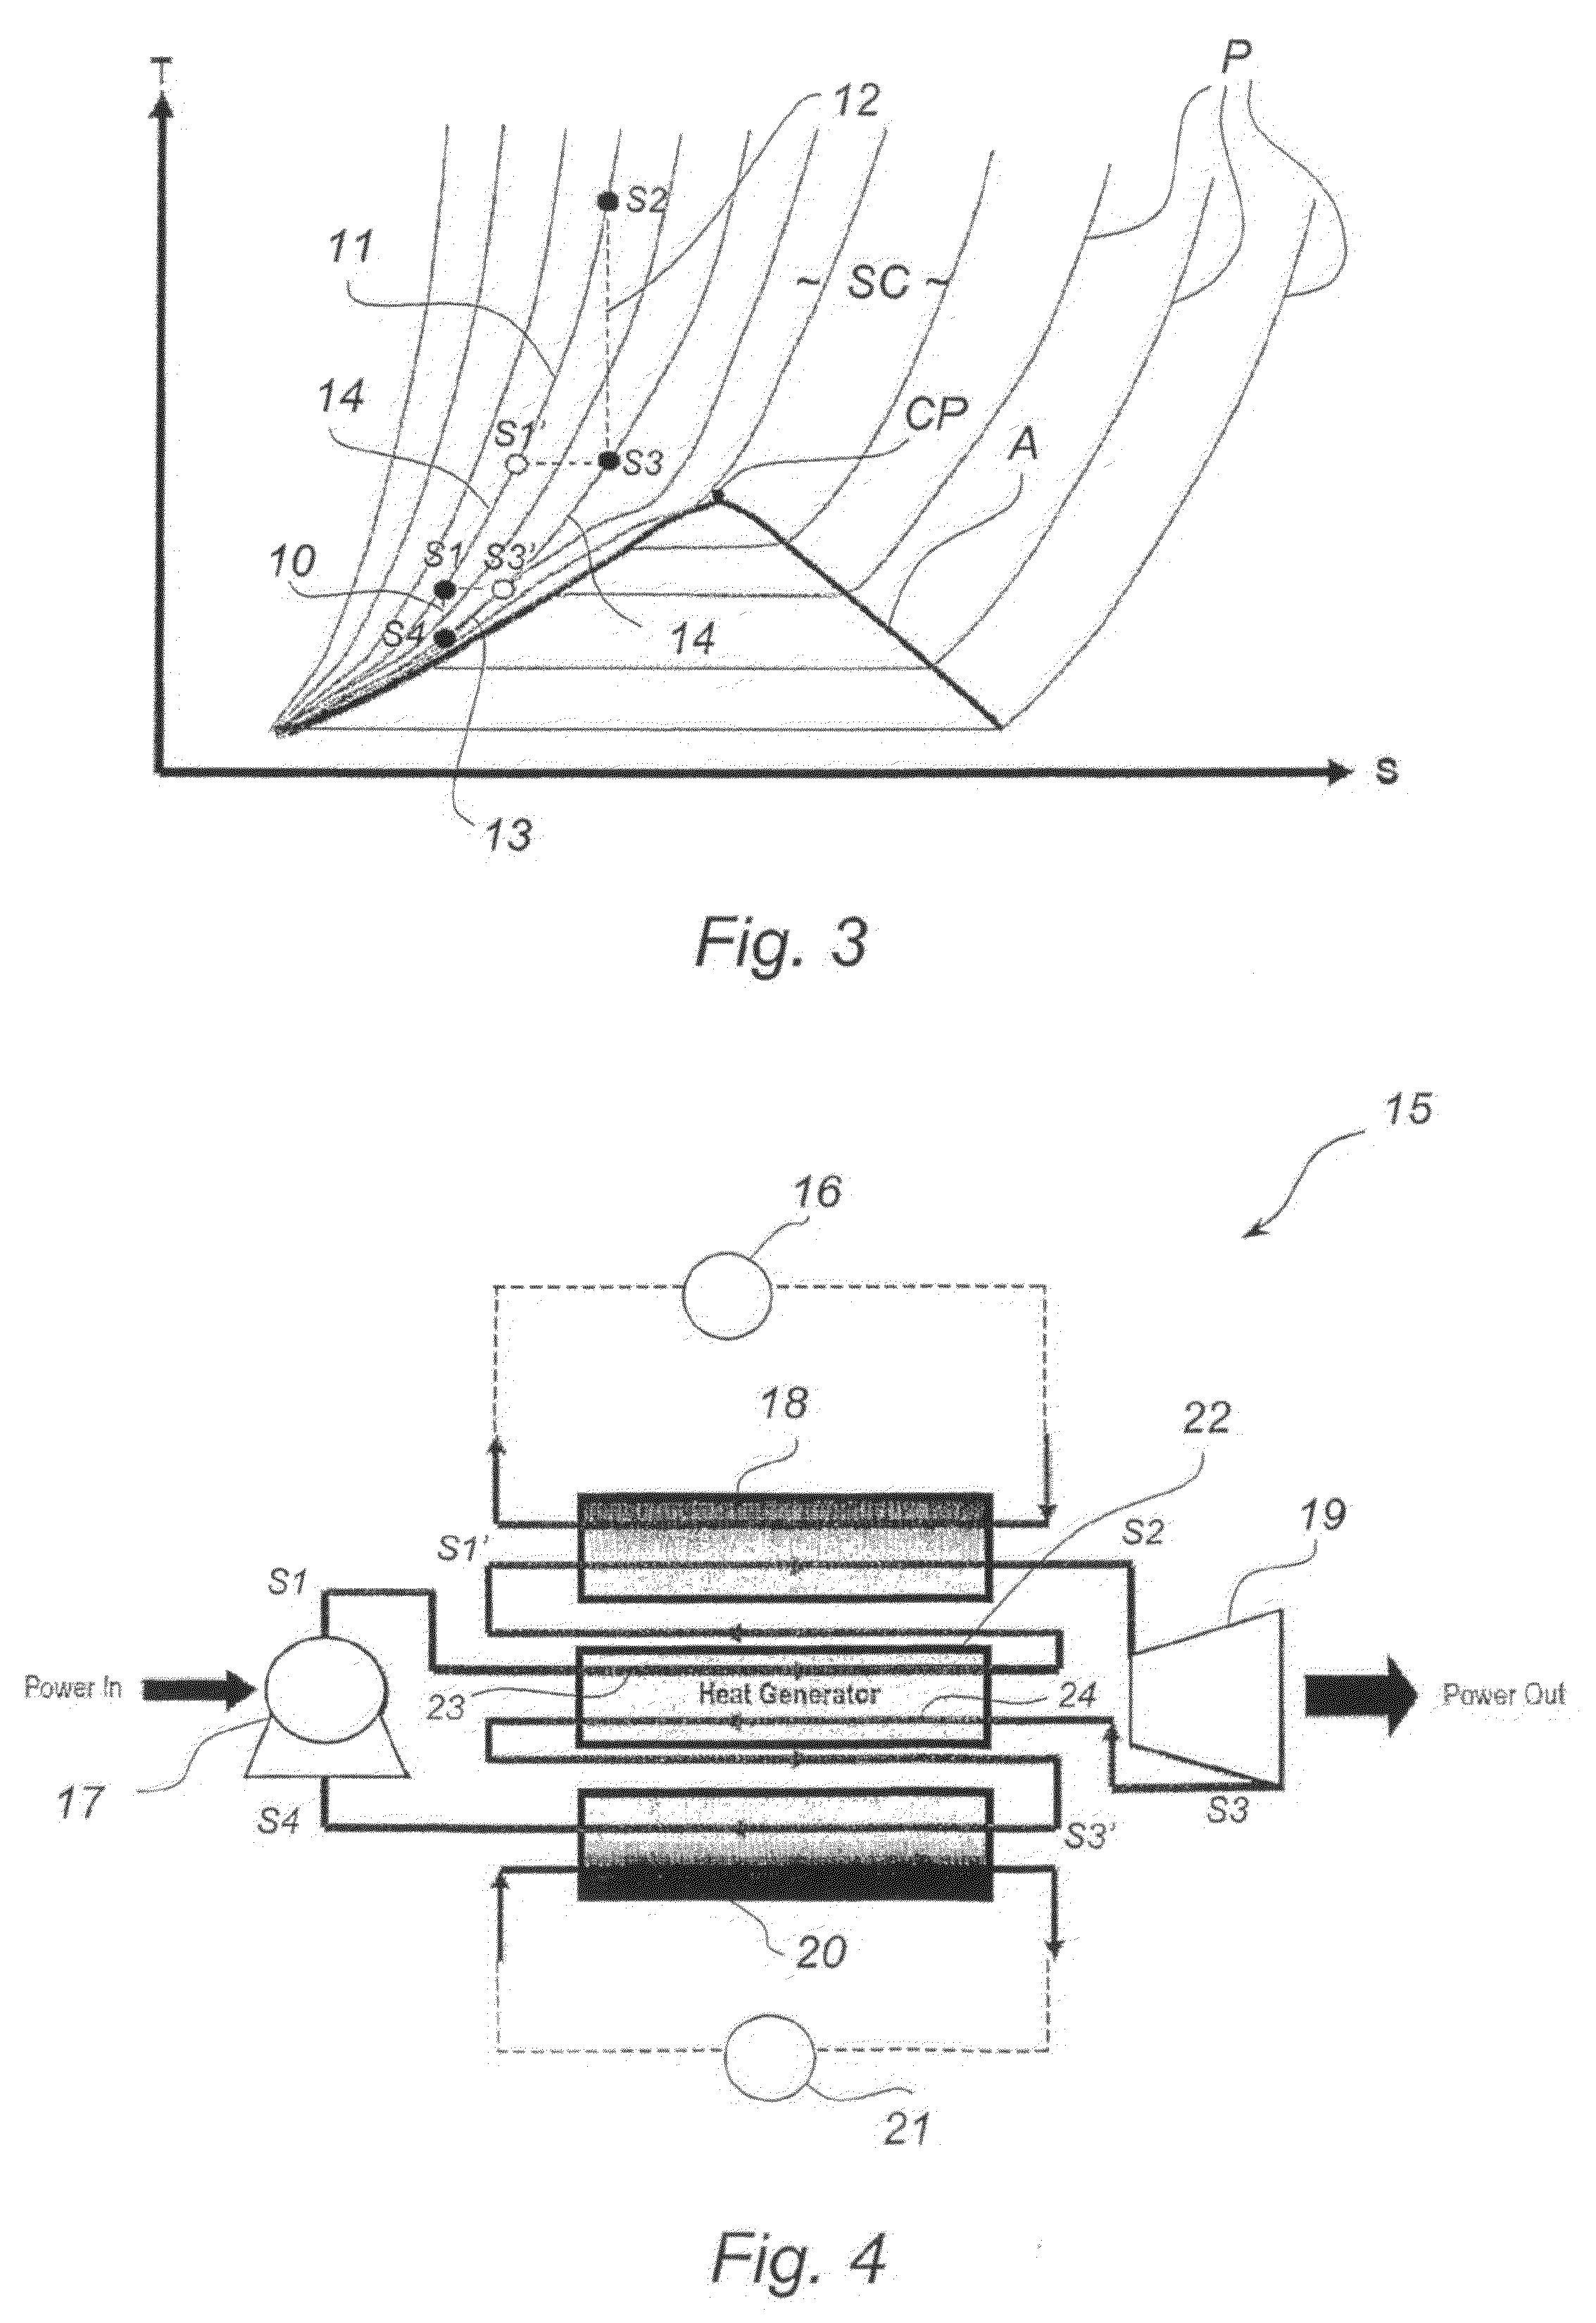 Method and system for generating power from a heat source